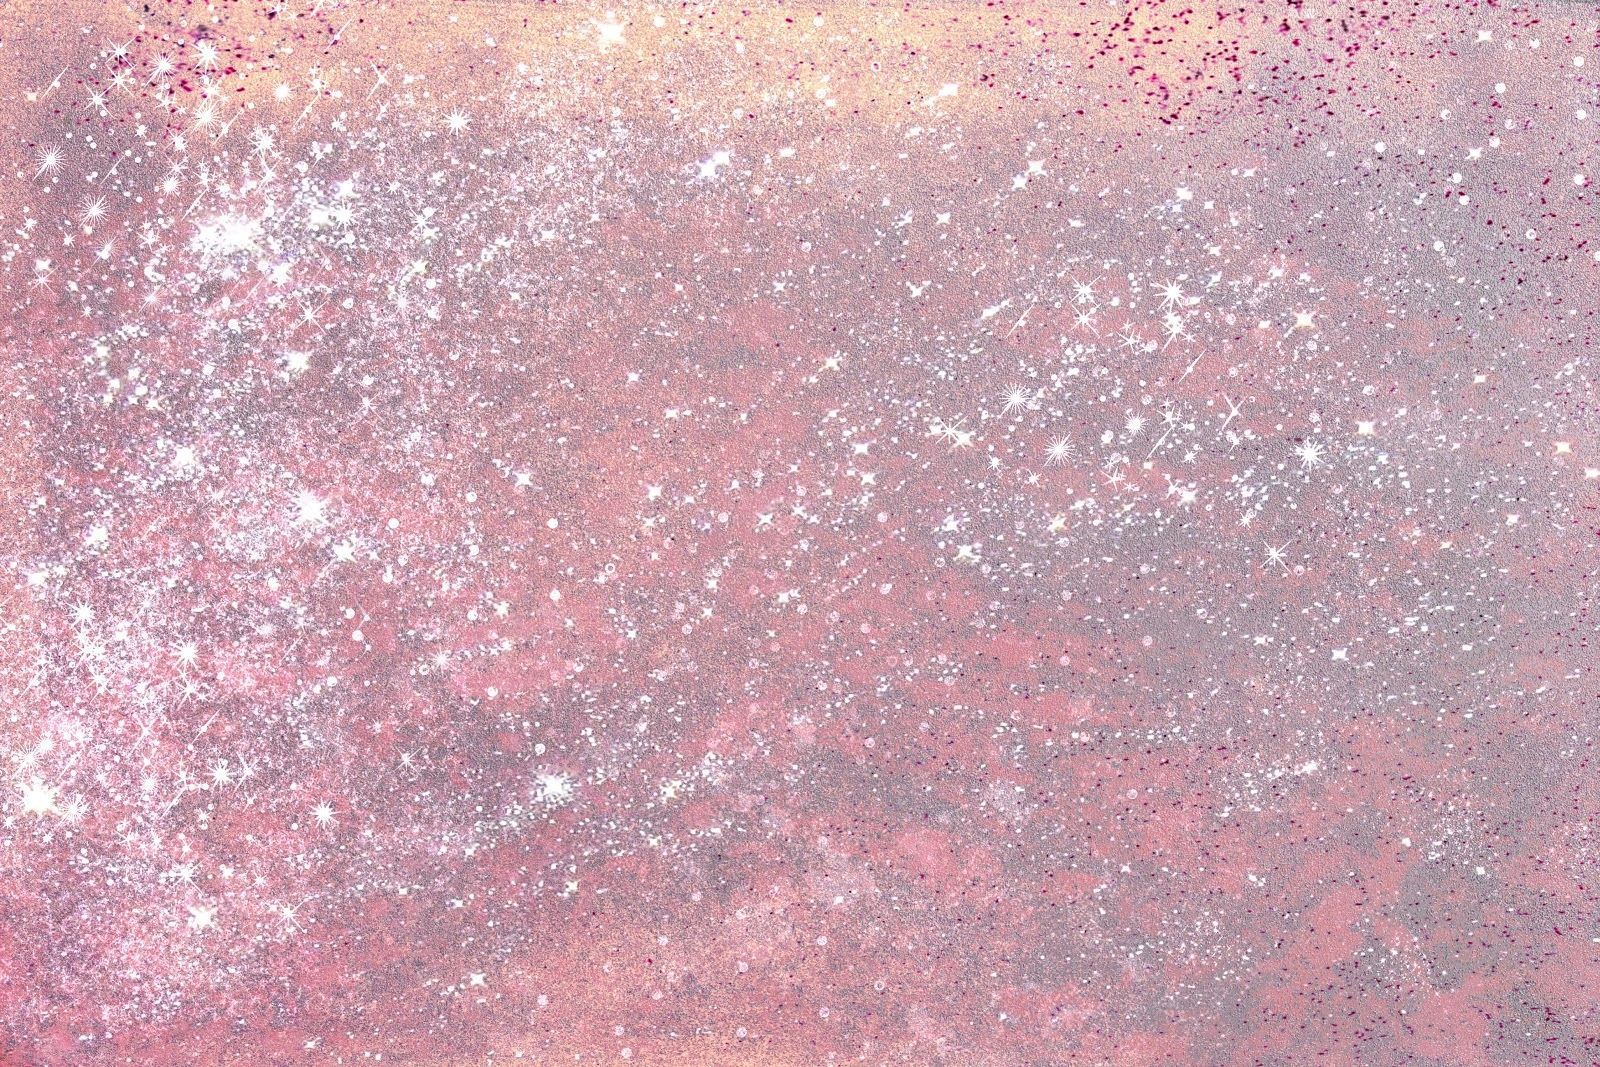 Aesthetic Sparkle Wallpapers